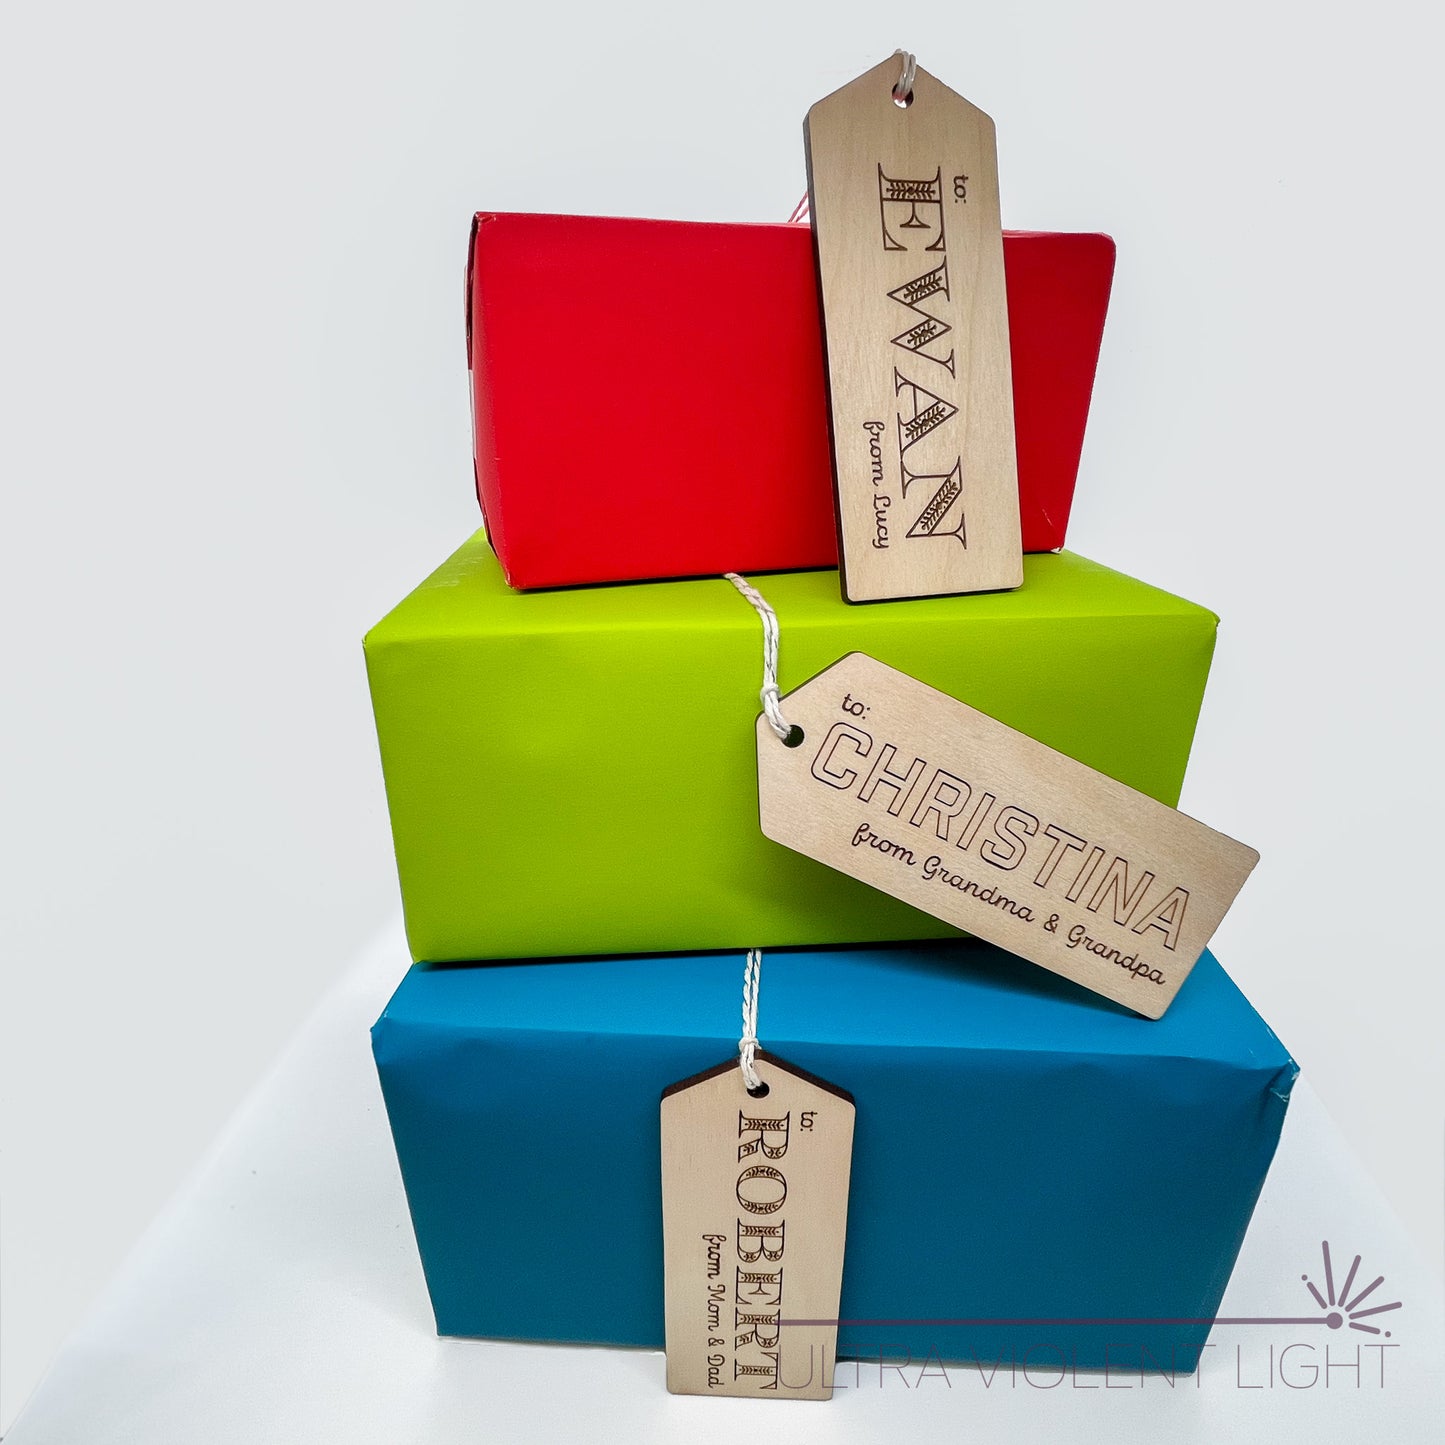 Personalized gift tags